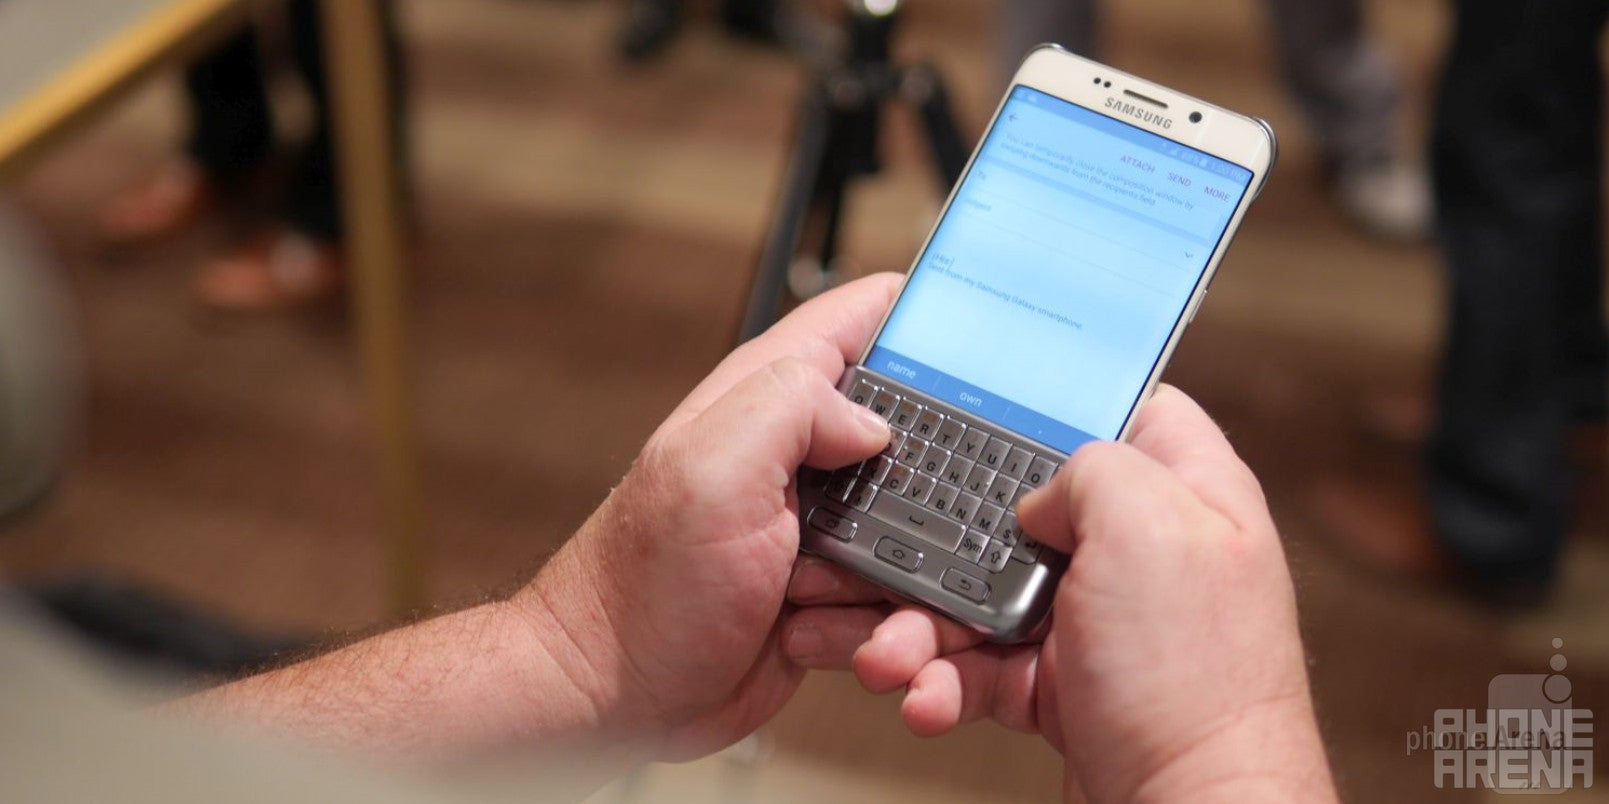 Samsung Keyboard Cover for the Galaxy S6 edge+ hands-on